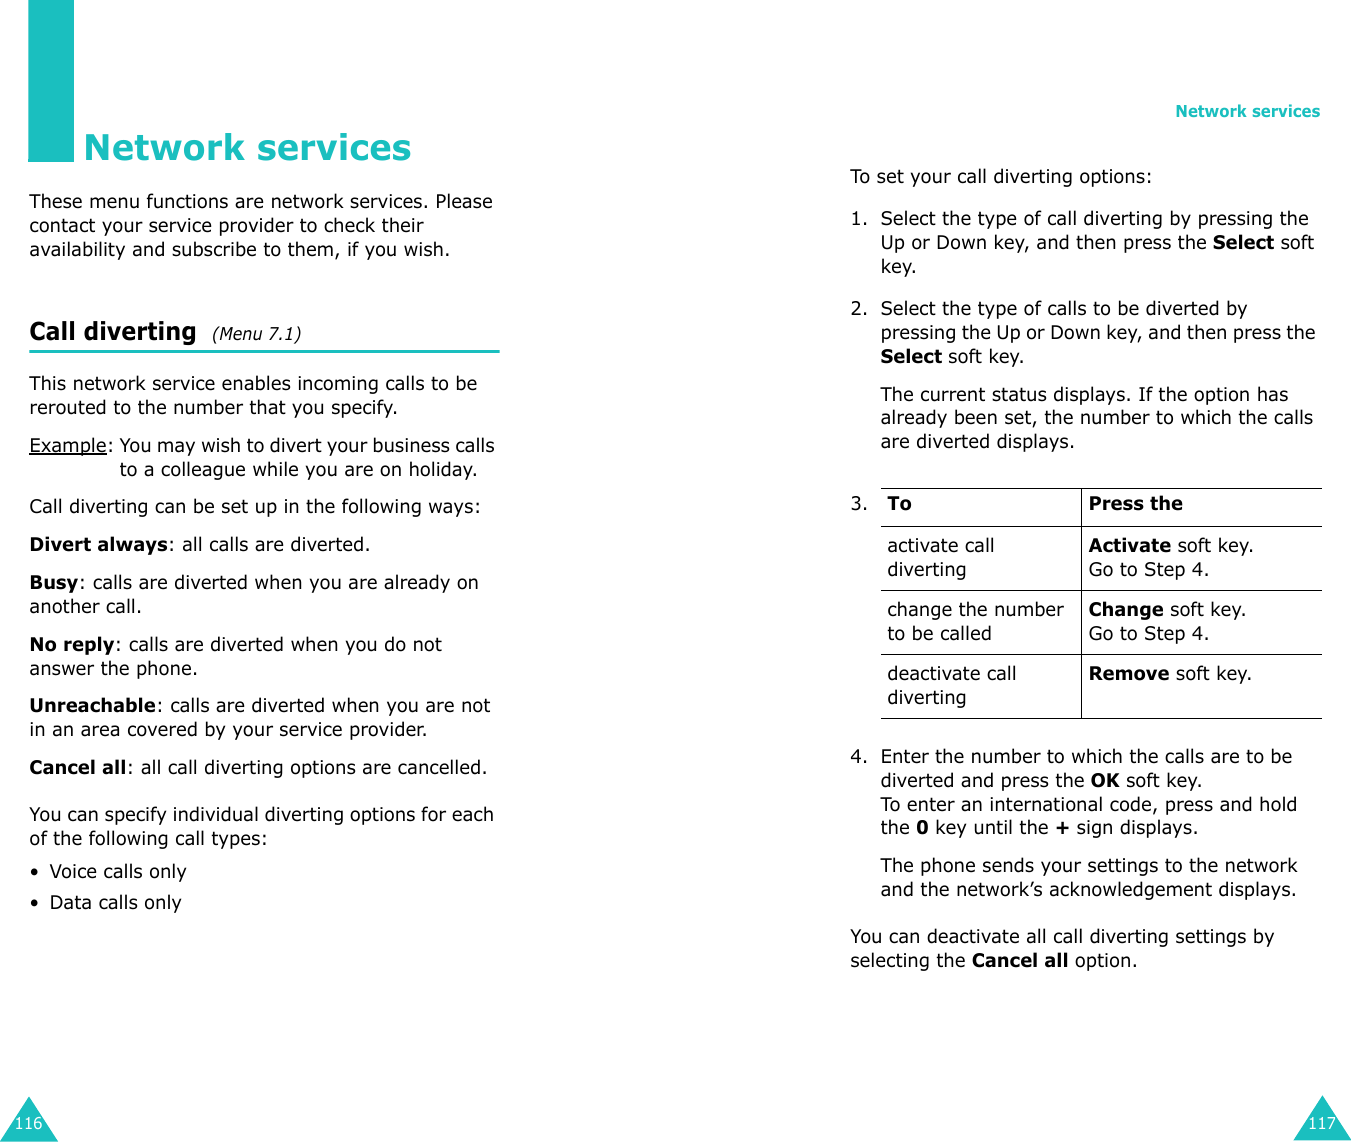 116Network servicesThese menu functions are network services. Please contact your service provider to check their availability and subscribe to them, if you wish.Call diverting  (Menu 7.1) This network service enables incoming calls to be rerouted to the number that you specify.Example: You may wish to divert your business calls to a colleague while you are on holiday.Call diverting can be set up in the following ways:Divert always: all calls are diverted.Busy: calls are diverted when you are already on another call.No reply: calls are diverted when you do not answer the phone.Unreachable: calls are diverted when you are not in an area covered by your service provider.Cancel all: all call diverting options are cancelled.You can specify individual diverting options for each of the following call types:• Voice calls only• Data calls onlyNetwork services117To set your call diverting options:1. Select the type of call diverting by pressing the Up or Down key, and then press the Select soft key.2. Select the type of calls to be diverted by pressing the Up or Down key, and then press the Select soft key.The current status displays. If the option has already been set, the number to which the calls are diverted displays.4. Enter the number to which the calls are to be diverted and press the OK soft key.To enter an international code, press and hold the 0 key until the + sign displays.The phone sends your settings to the network and the network’s acknowledgement displays.You can deactivate all call diverting settings by selecting the Cancel all option.3.To Press theactivate call divertingActivate soft key.Go to Step 4.change the number to be calledChange soft key.Go to Step 4. deactivate call divertingRemove soft key.